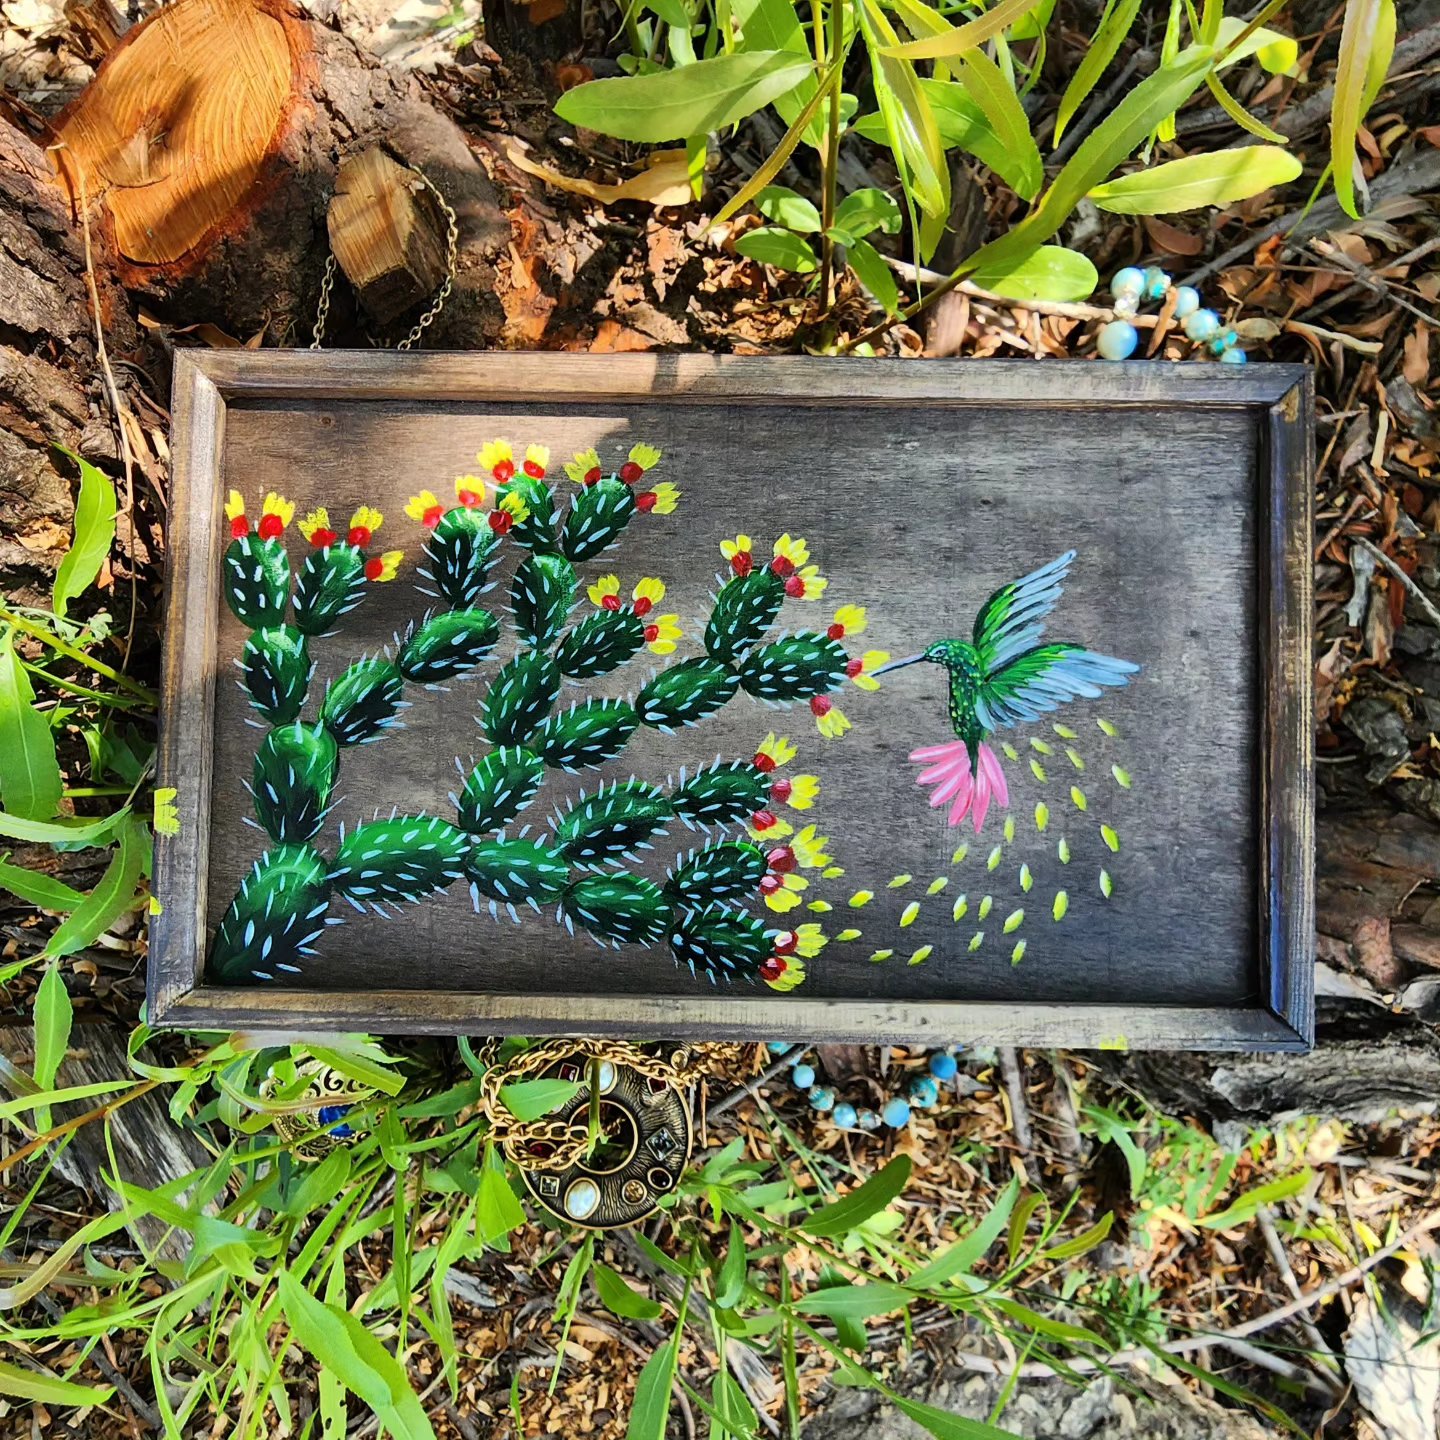 Beautiful handpainted trinket boxes with metal feet and a mirror. This cute trinket box is an ideal gift for a special loved one. You can store jewelry such as rings, necklaces, bracelets, or anything you would like to keep in a particular place, especially in this lovely and artistic trinket box.